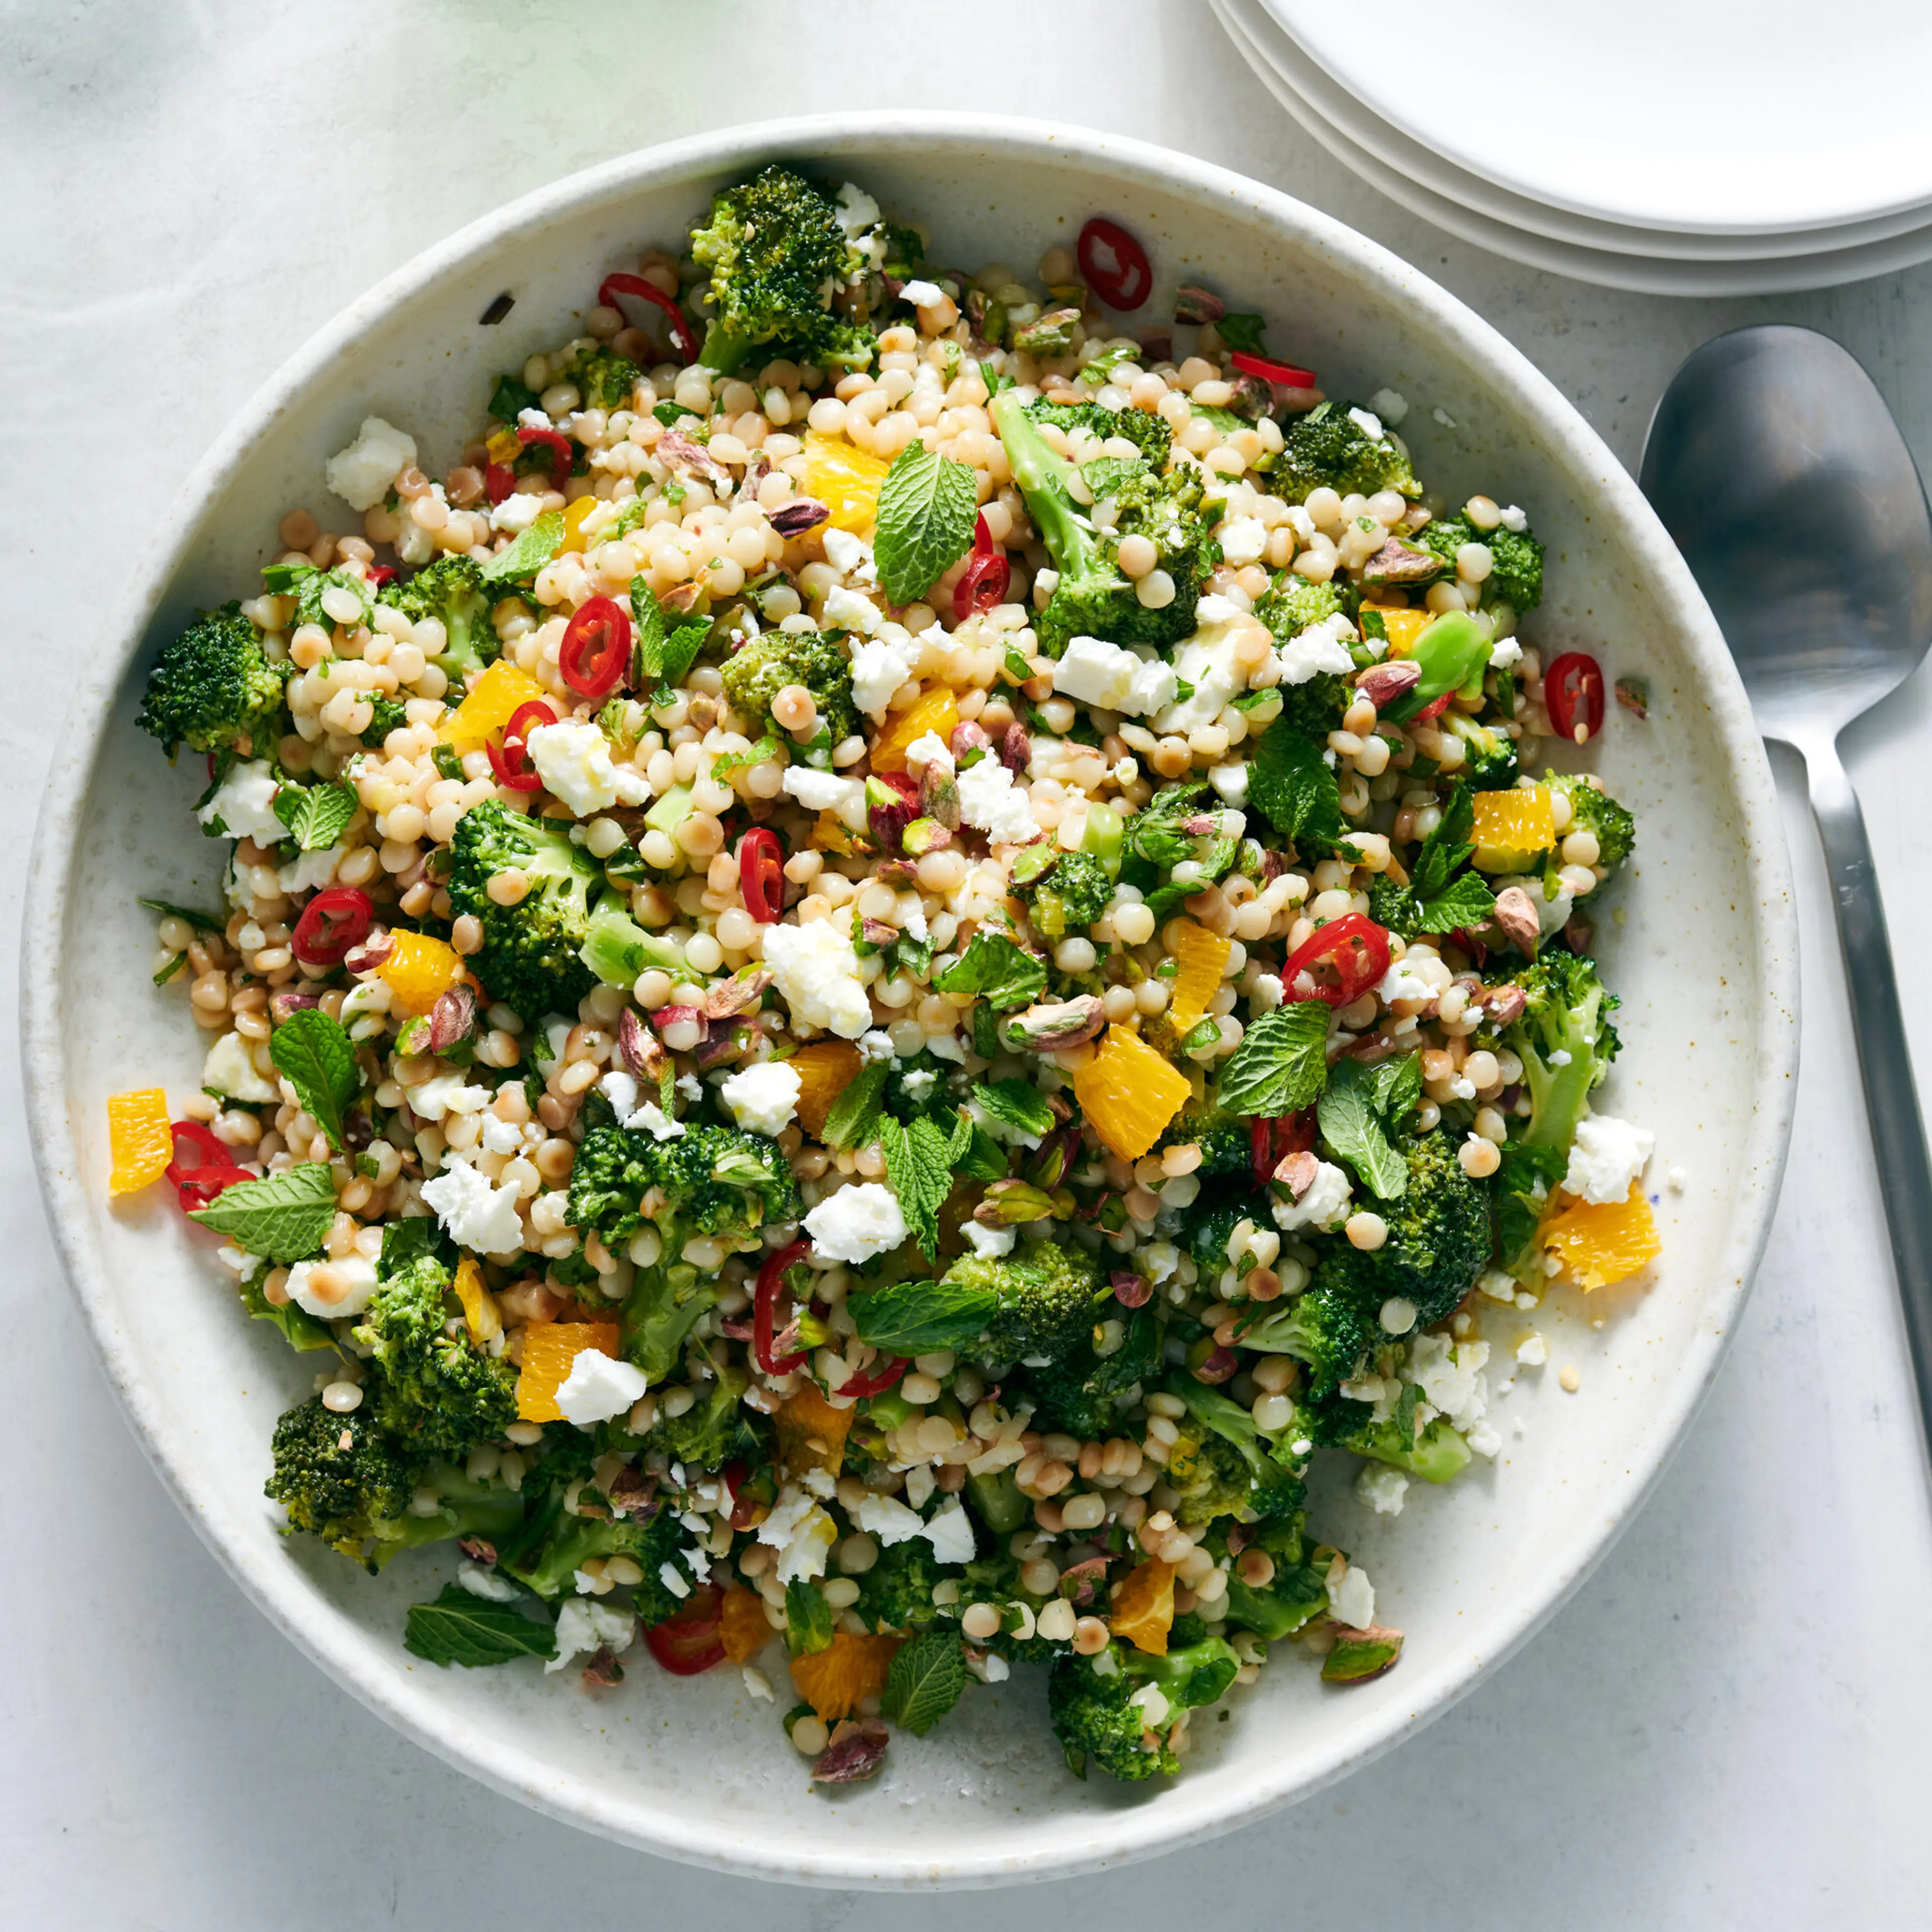 Citrusy Couscous Salad With Broccoli and Feta